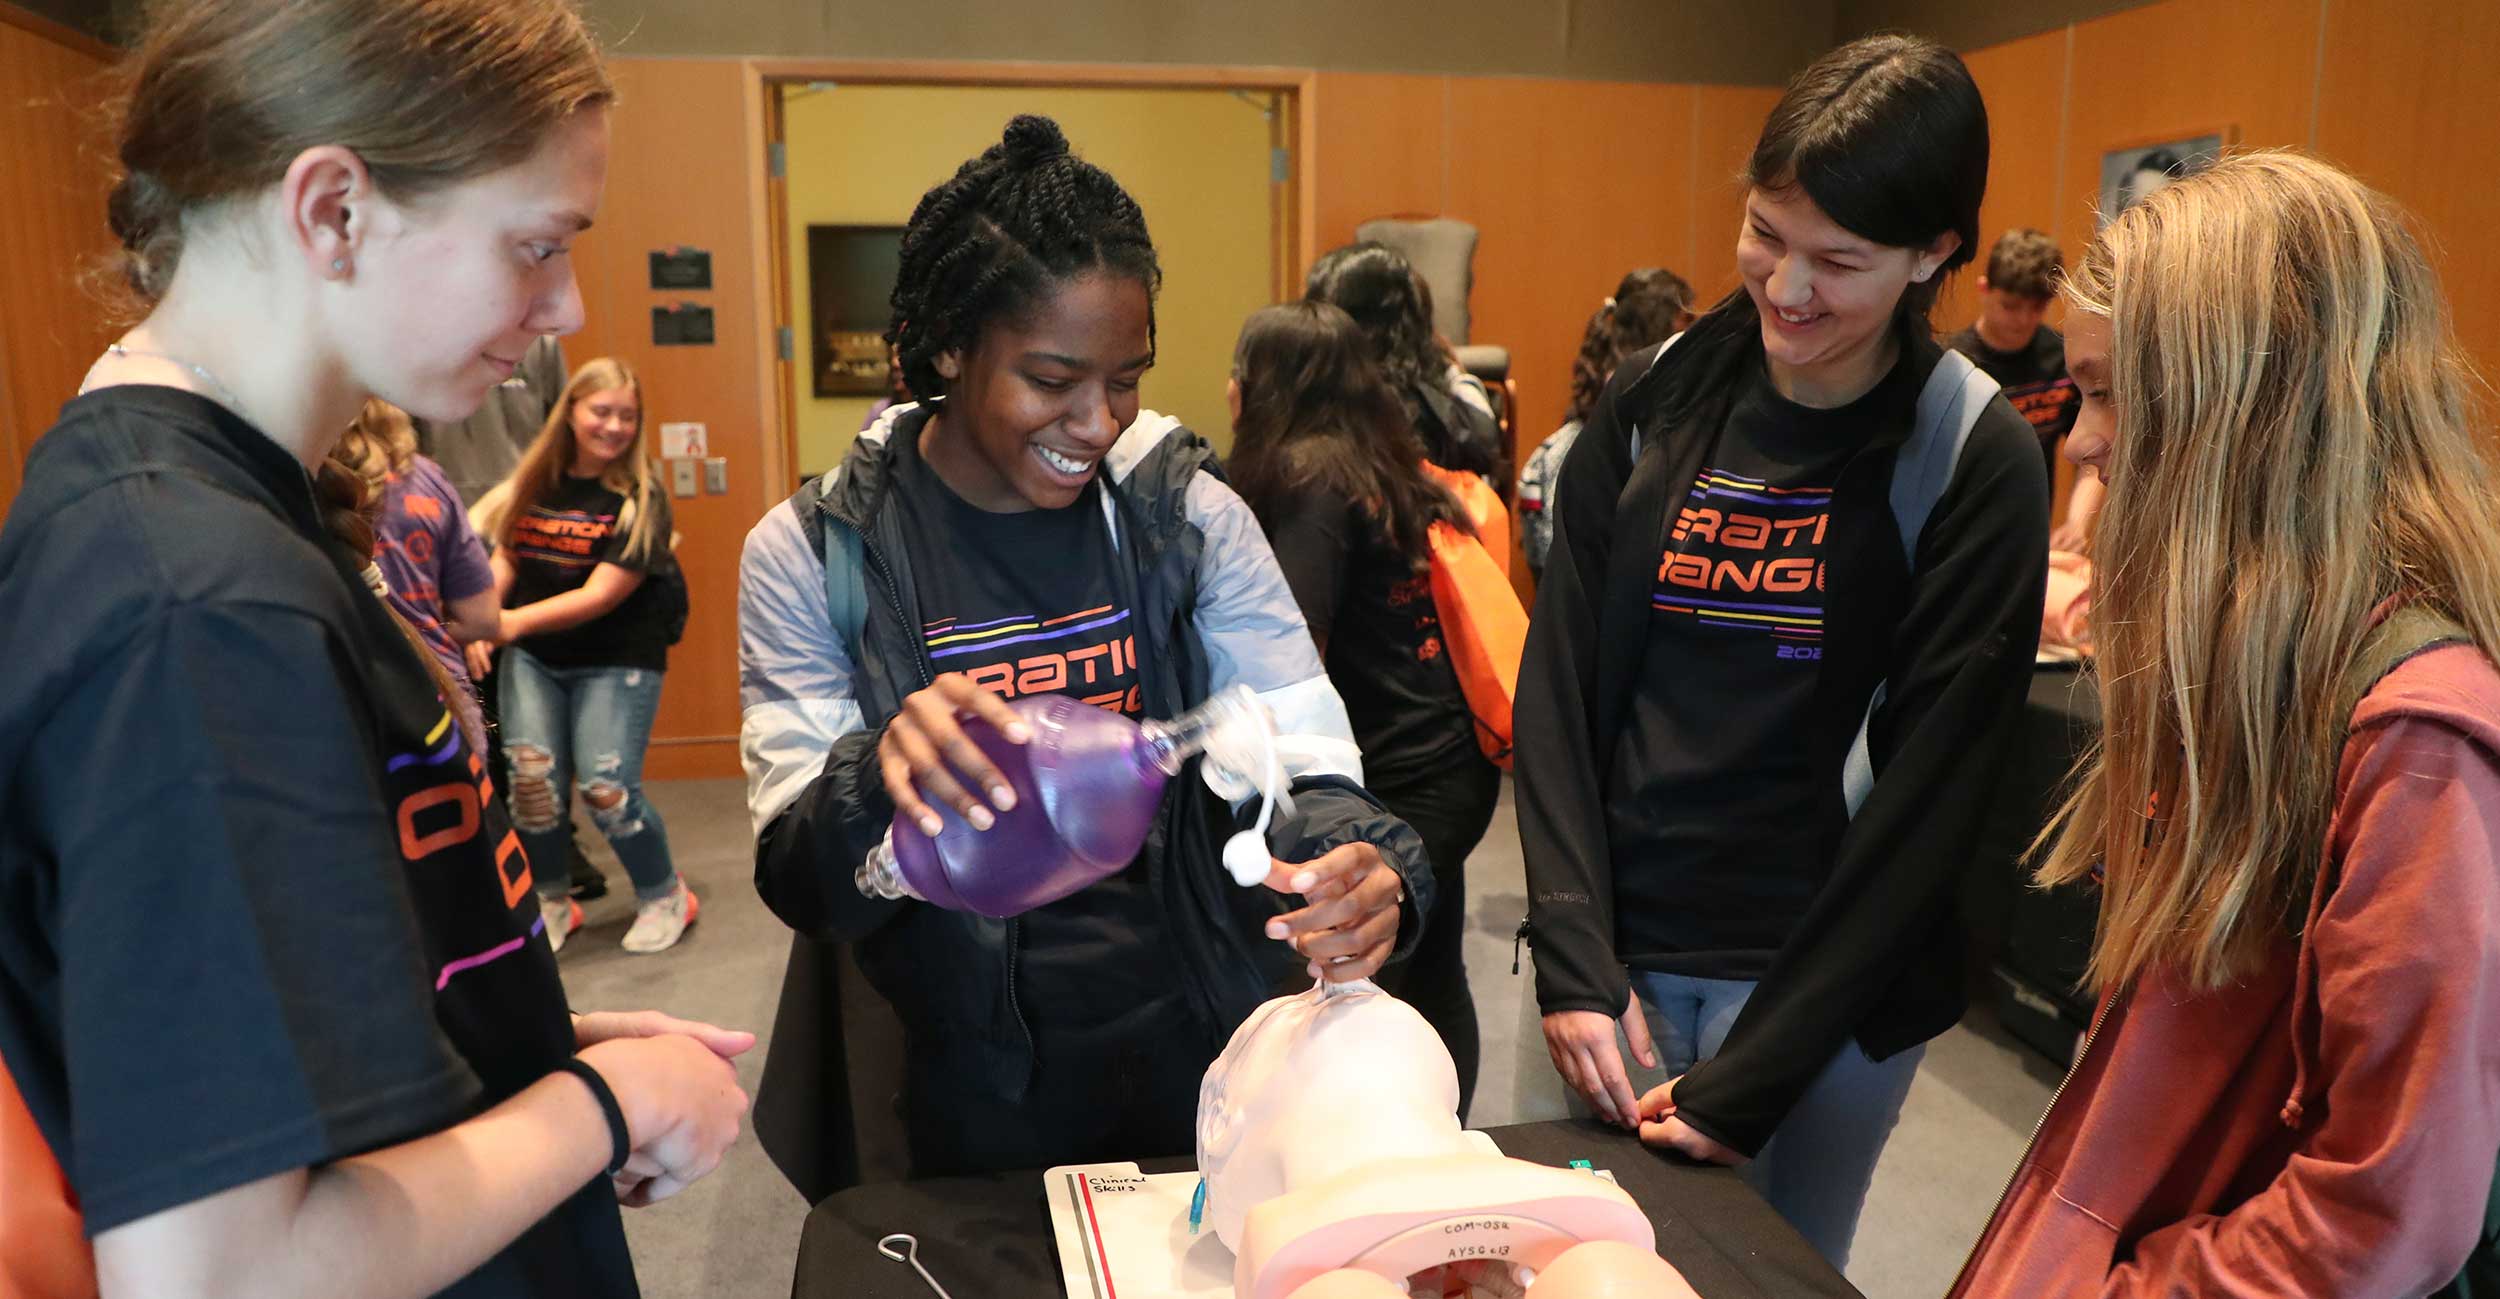 From left: Chloe Ward, Julia Veal, Keira Ulrich and Aubry Grauer take part in an intubation exercise during Operation Orange at OSU in Stillwater on June 1, 2021.